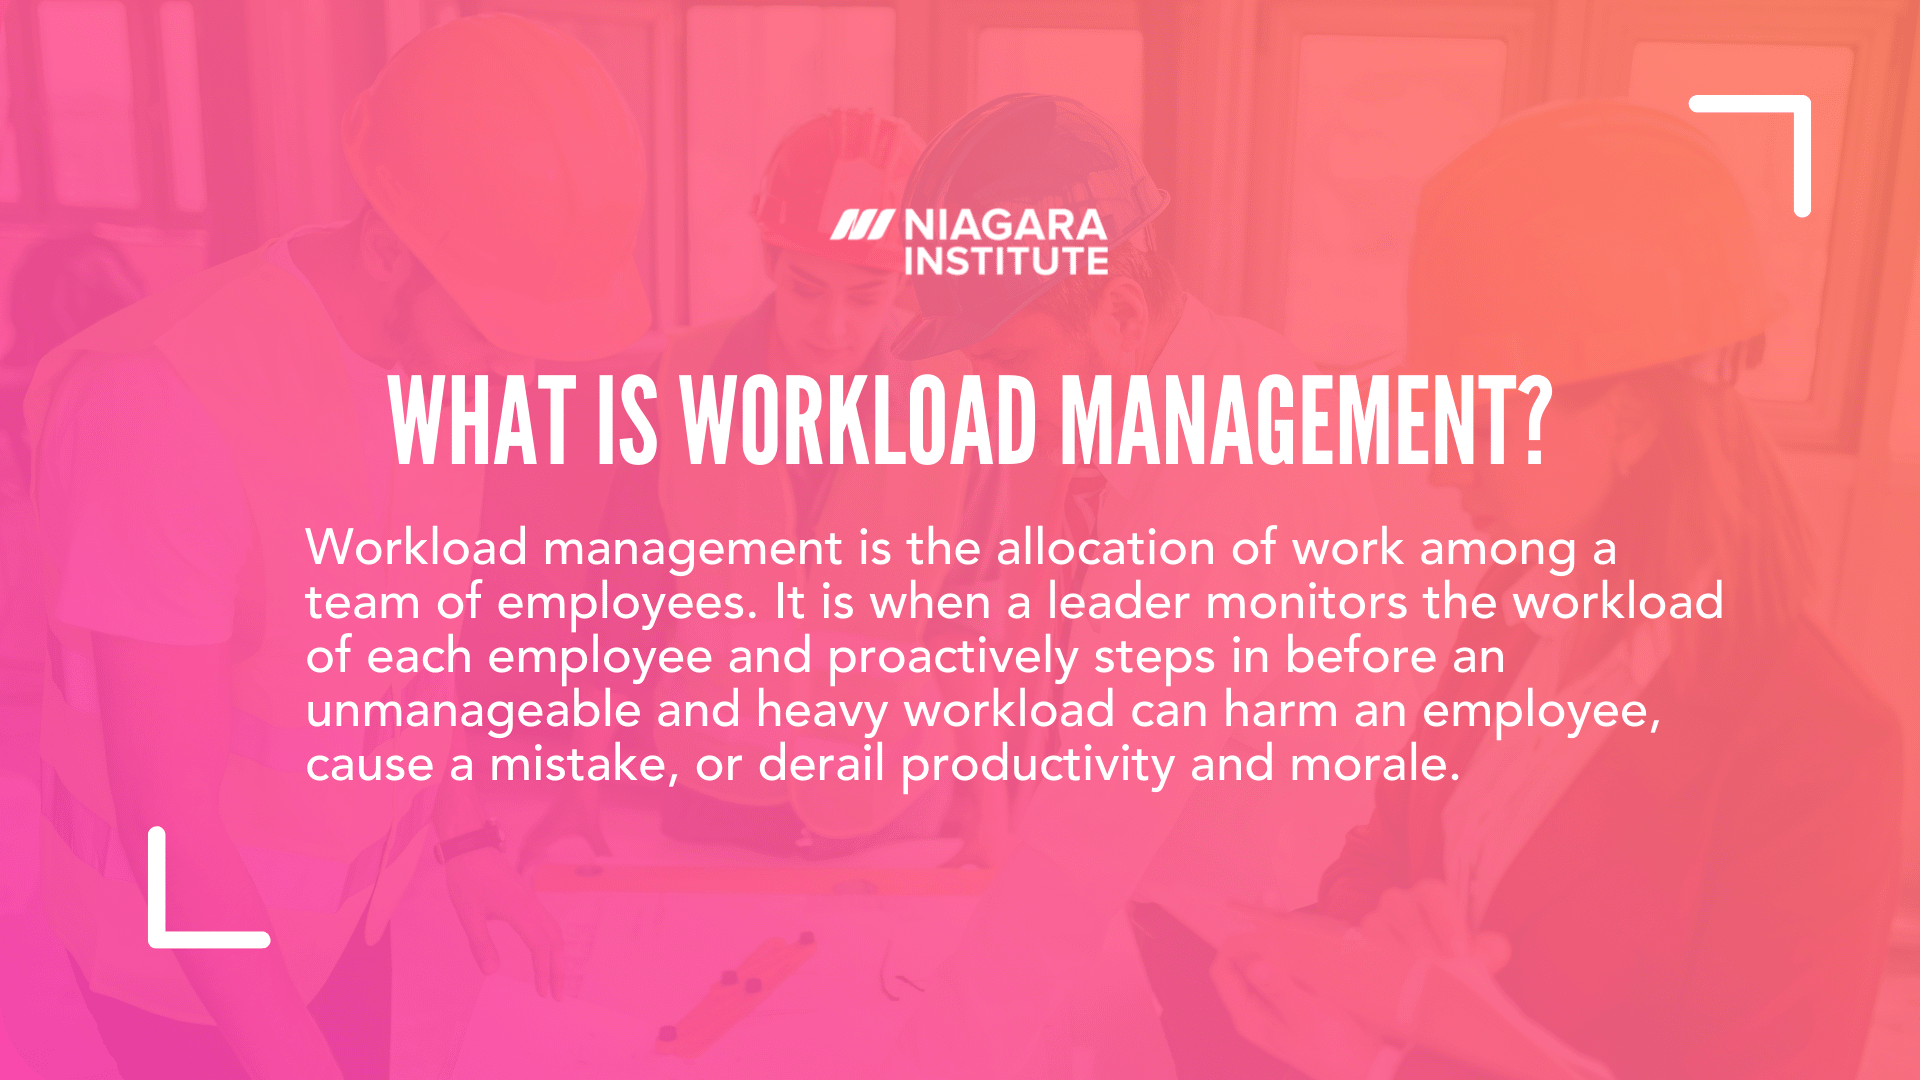 What is Workload Management  - Niagara Institute (1)